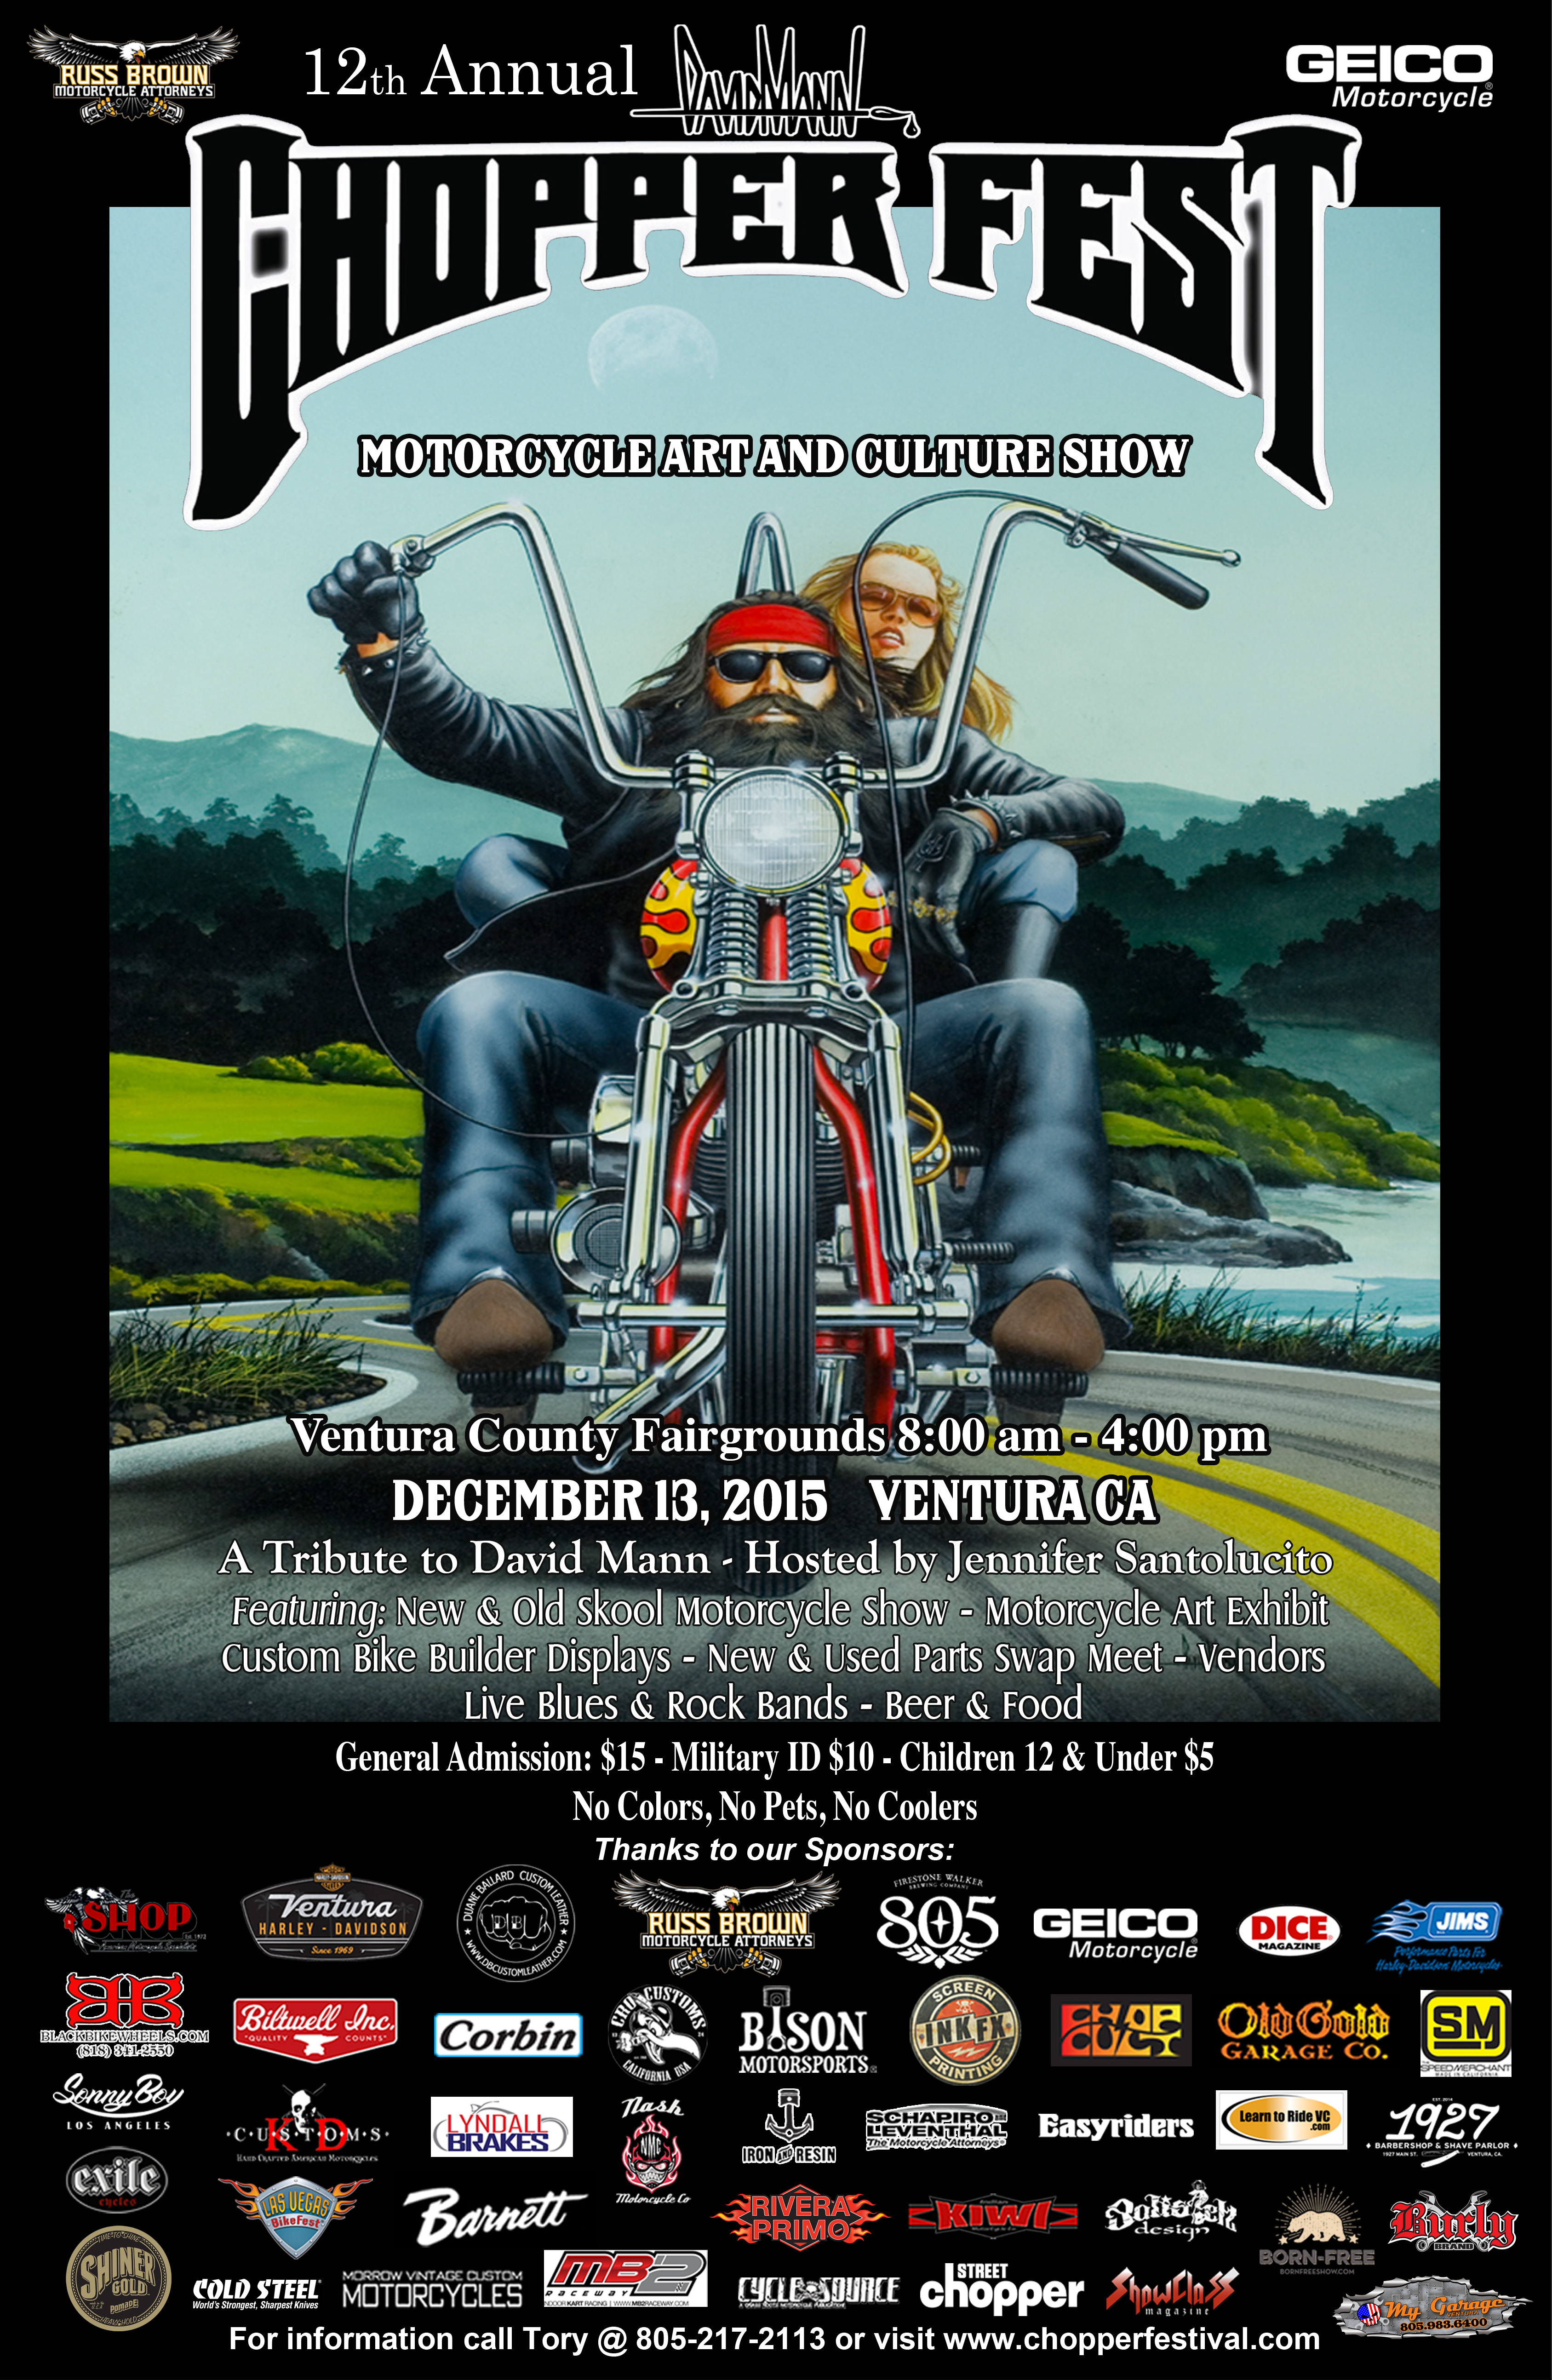 THE 12TH ANNUAL CHOPPER FEST MOTORCYCLE ART AND CULTURE SHOW